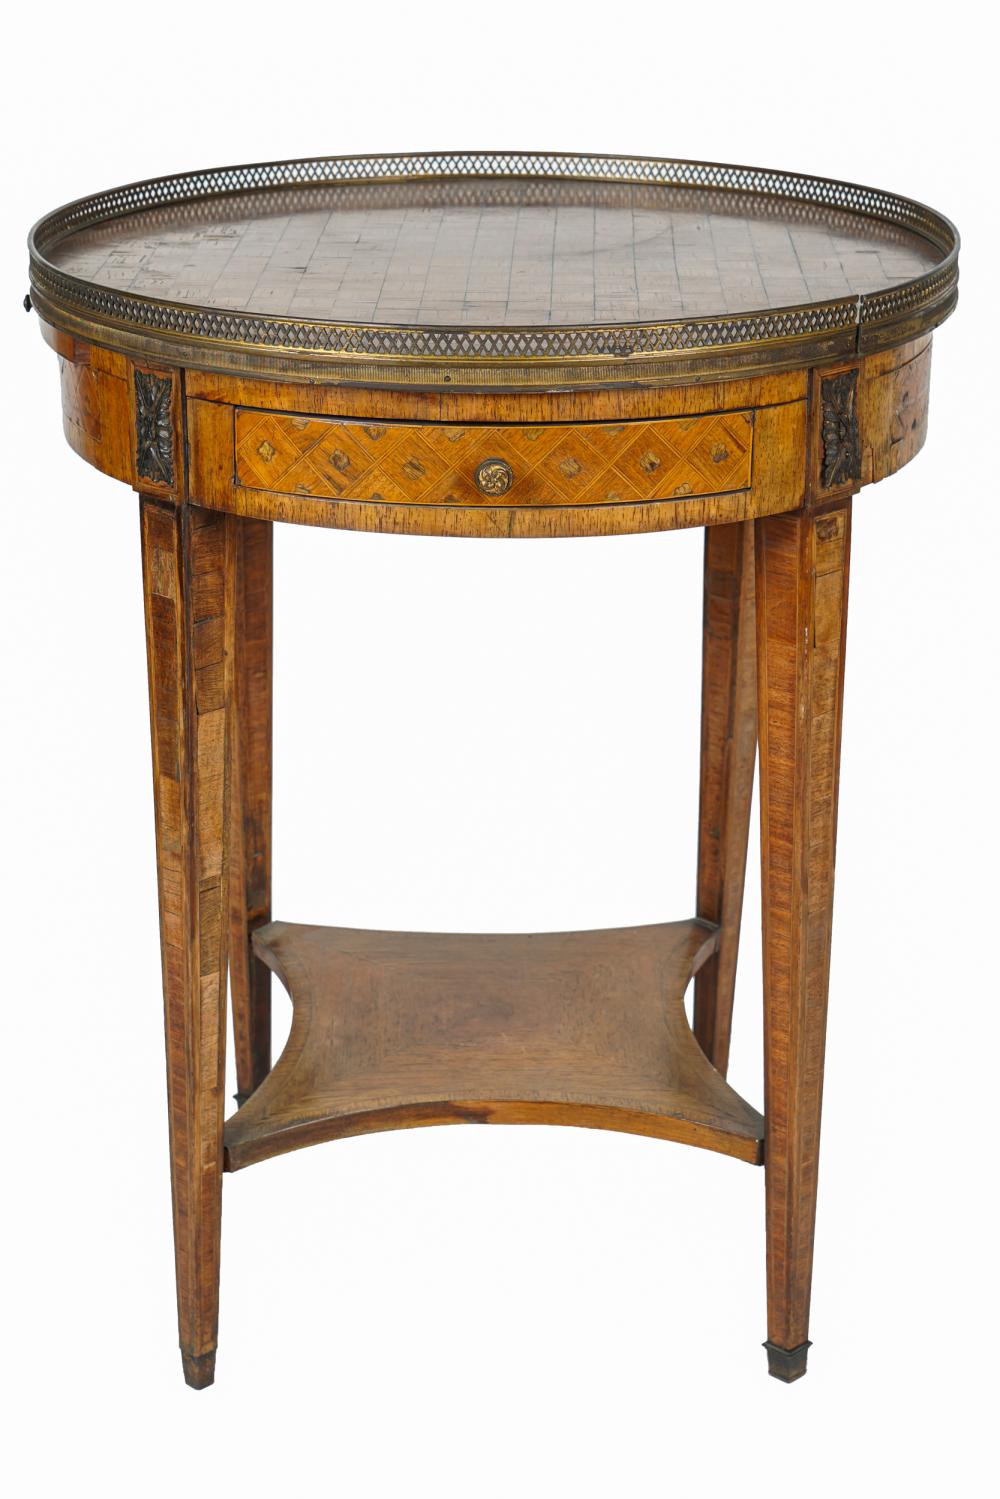 FRENCH PARQUETRY GUERIDONthe circular